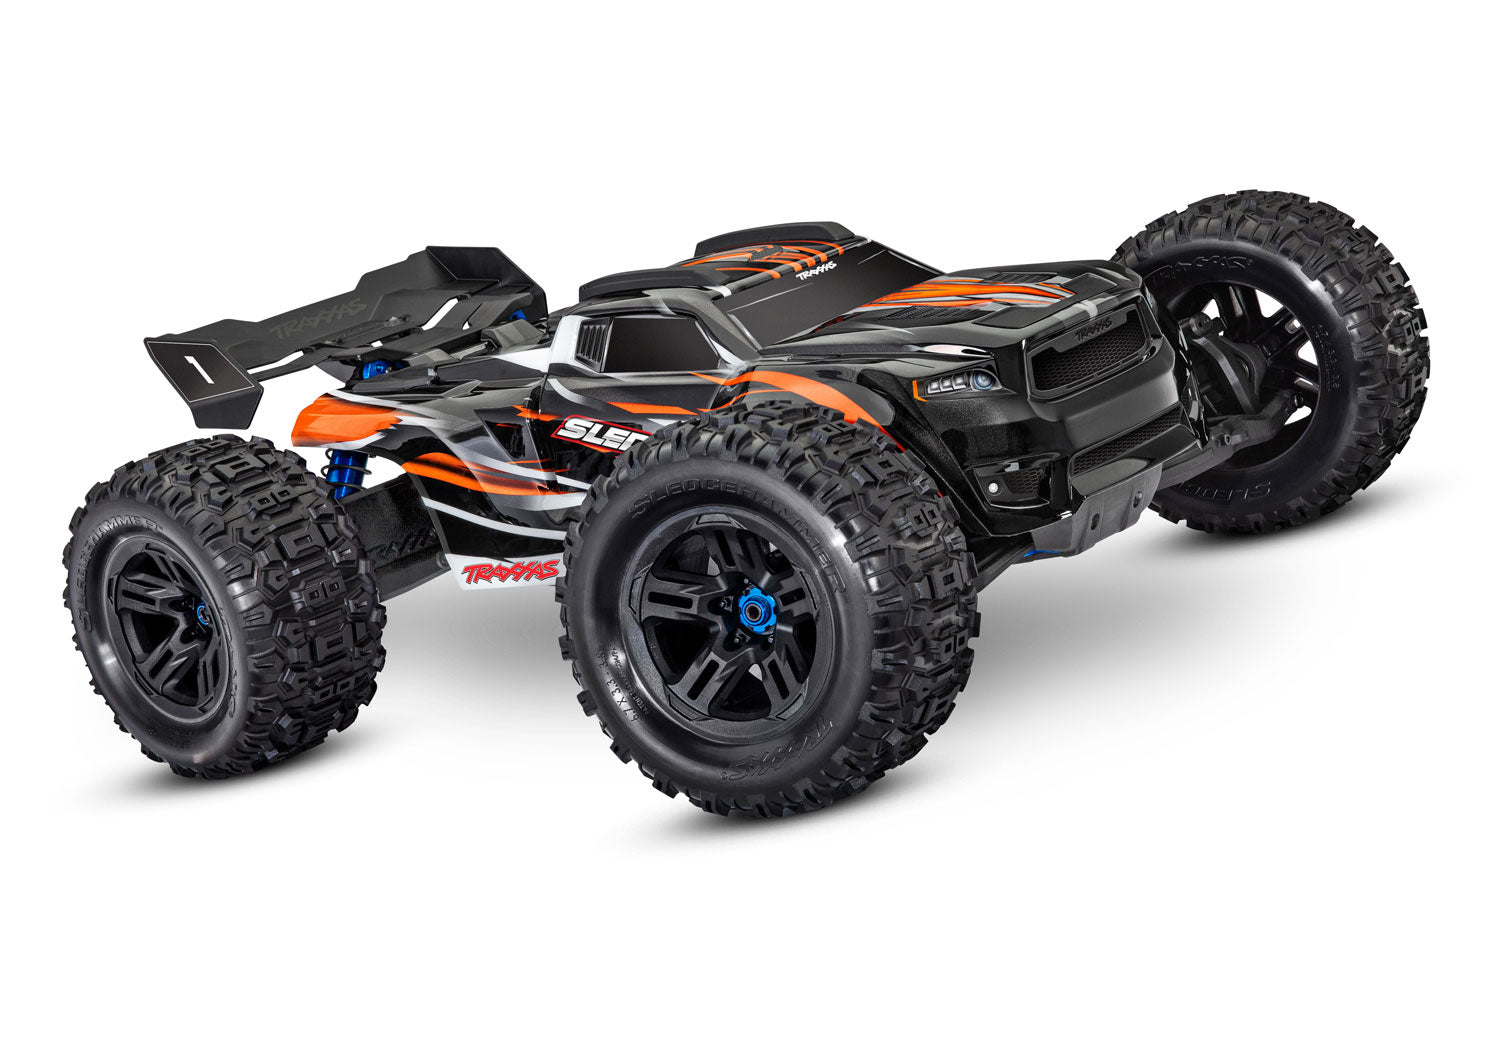 Orange Sledge®: 1/8 Scale 4WD Brushless Electric Monster Truck with TQi 2.4GHz Traxxas Link™ Enabled Radio System and Traxxas Stability Management (TSM)®